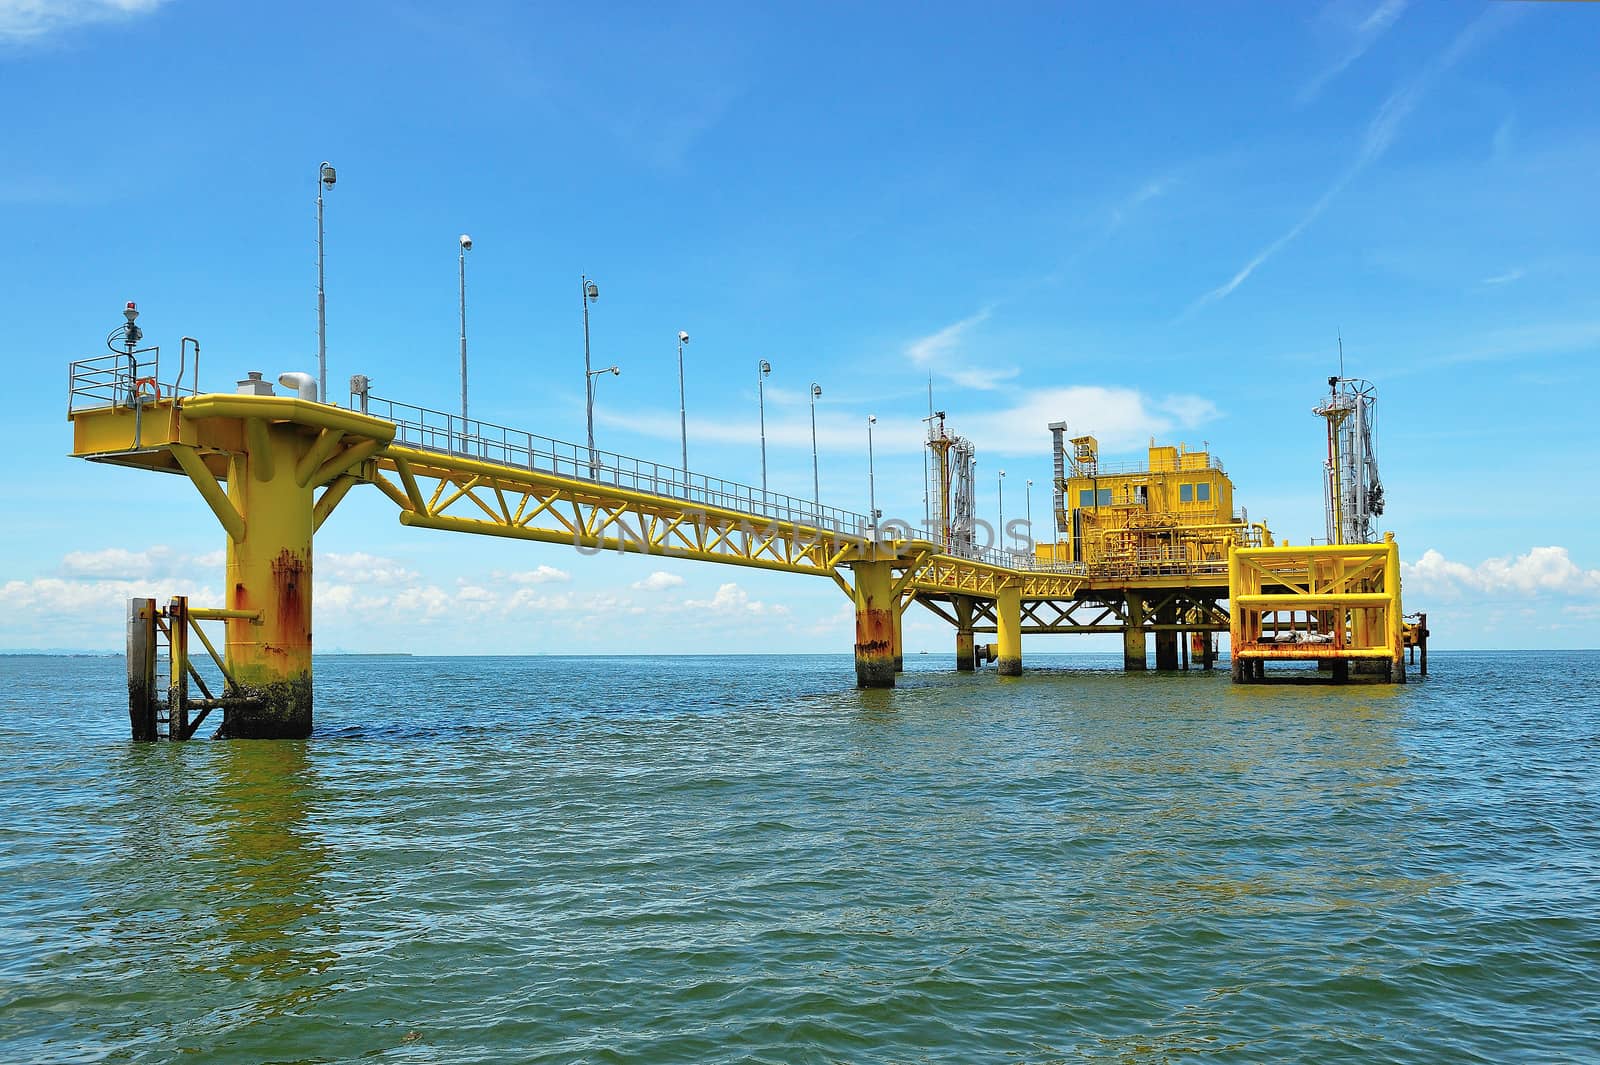 Oil transfer platforms by think4photop